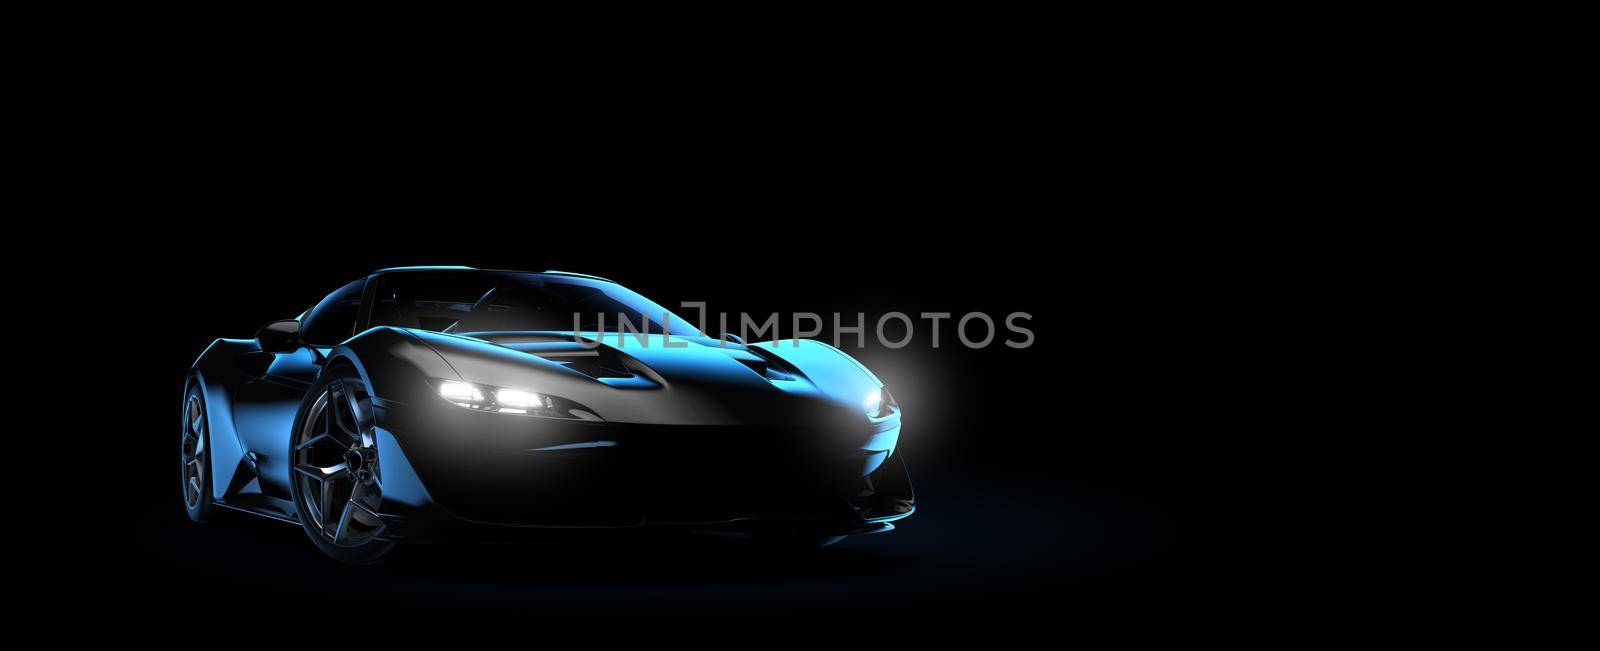 Generic and unbranded black sport car isolated on a dark background: 3D illustration